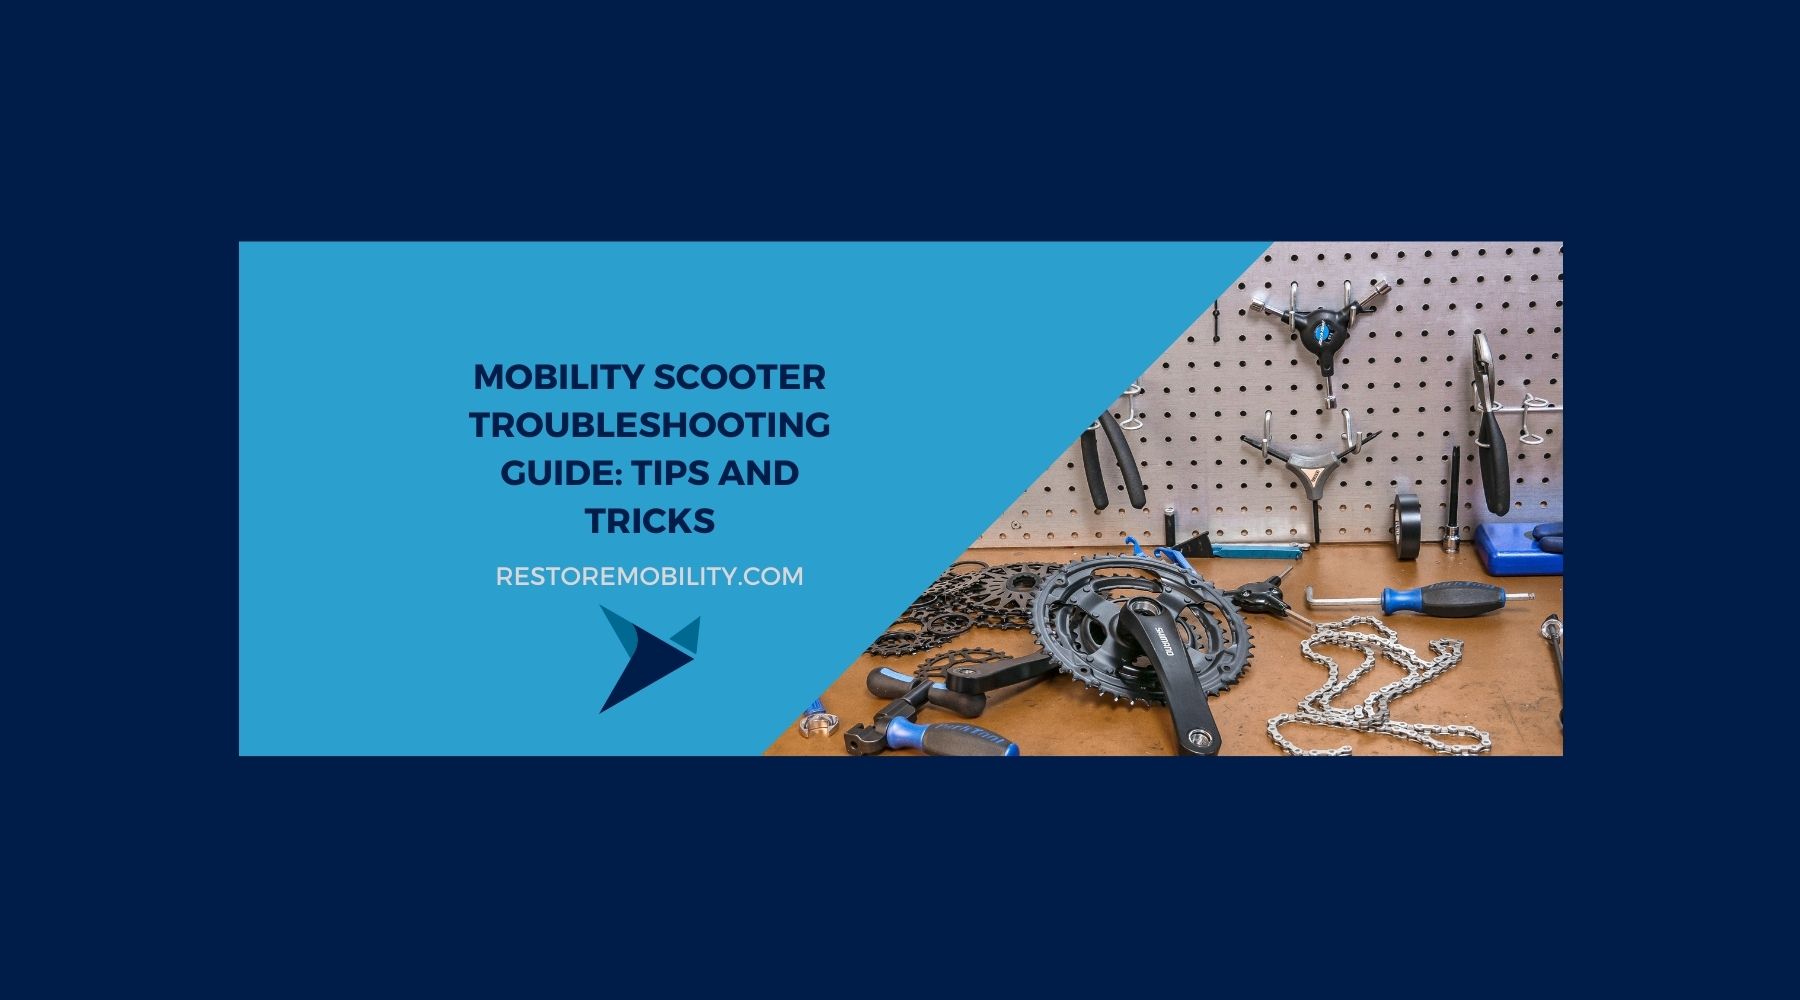 Mobility Scooter Troubleshooting Guide: Tips and Tricks